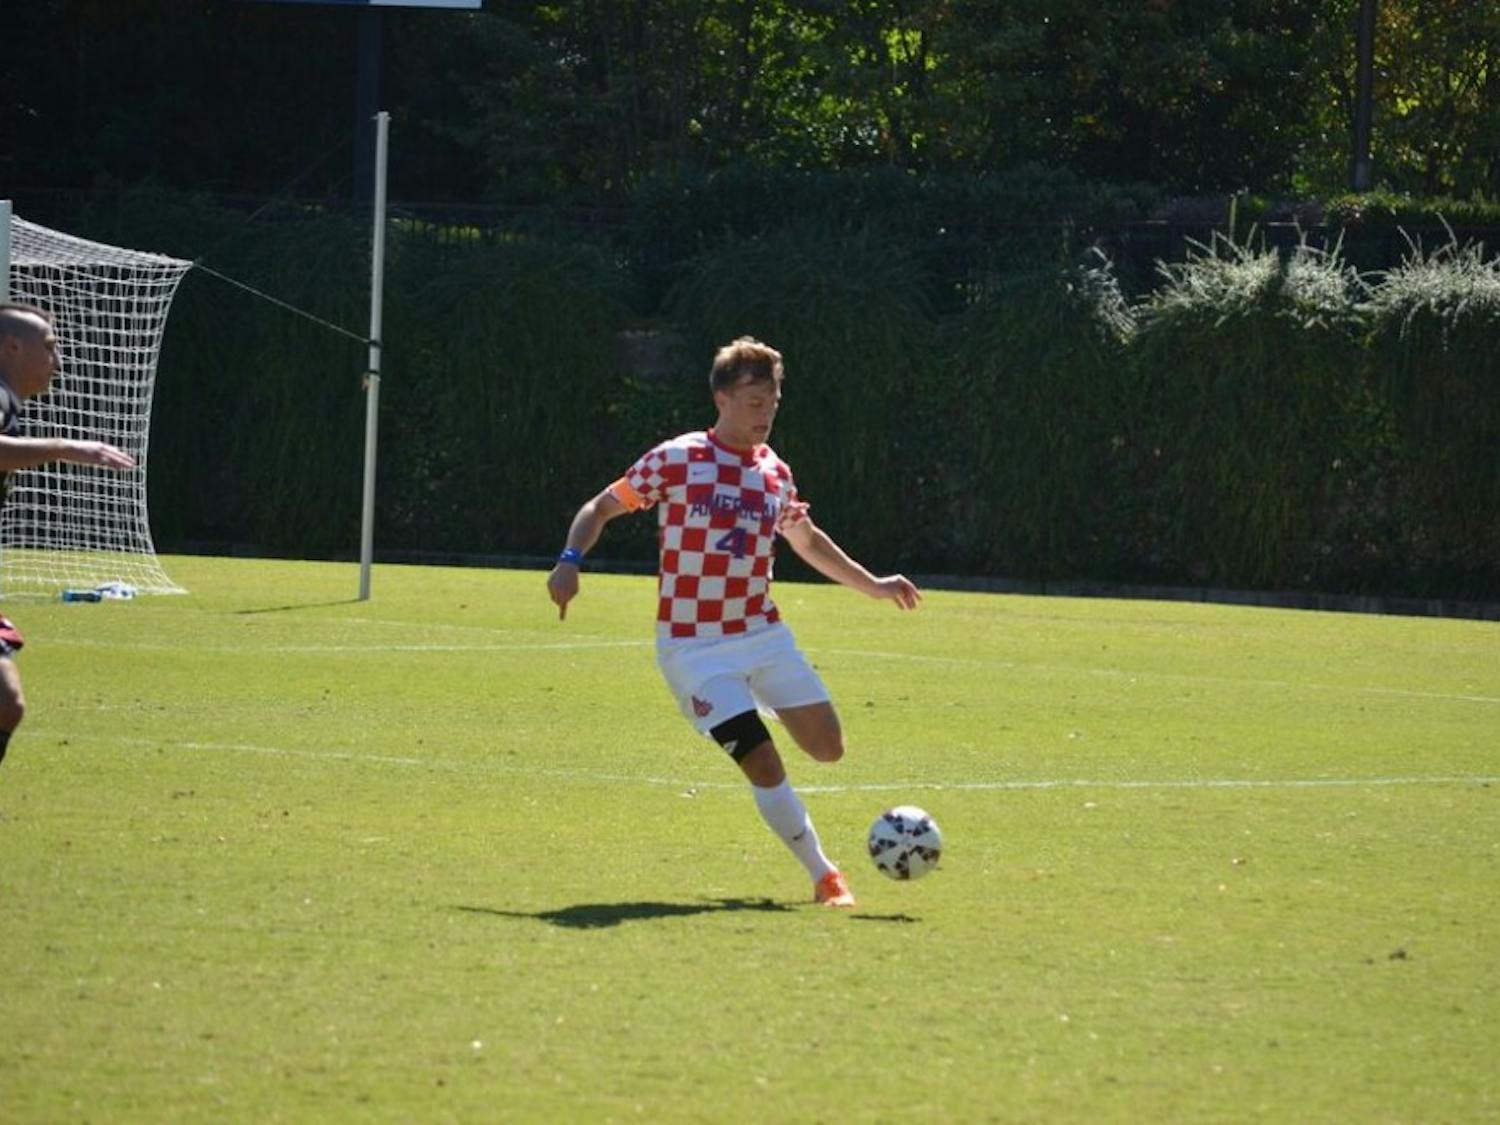 Photo by: Owain JamesSenior Midfielder Liam Robley passes the ball to a teammate in a game against Layfayette earlier this season. Robley scored AU's third goal against Bucknell.&nbsp;